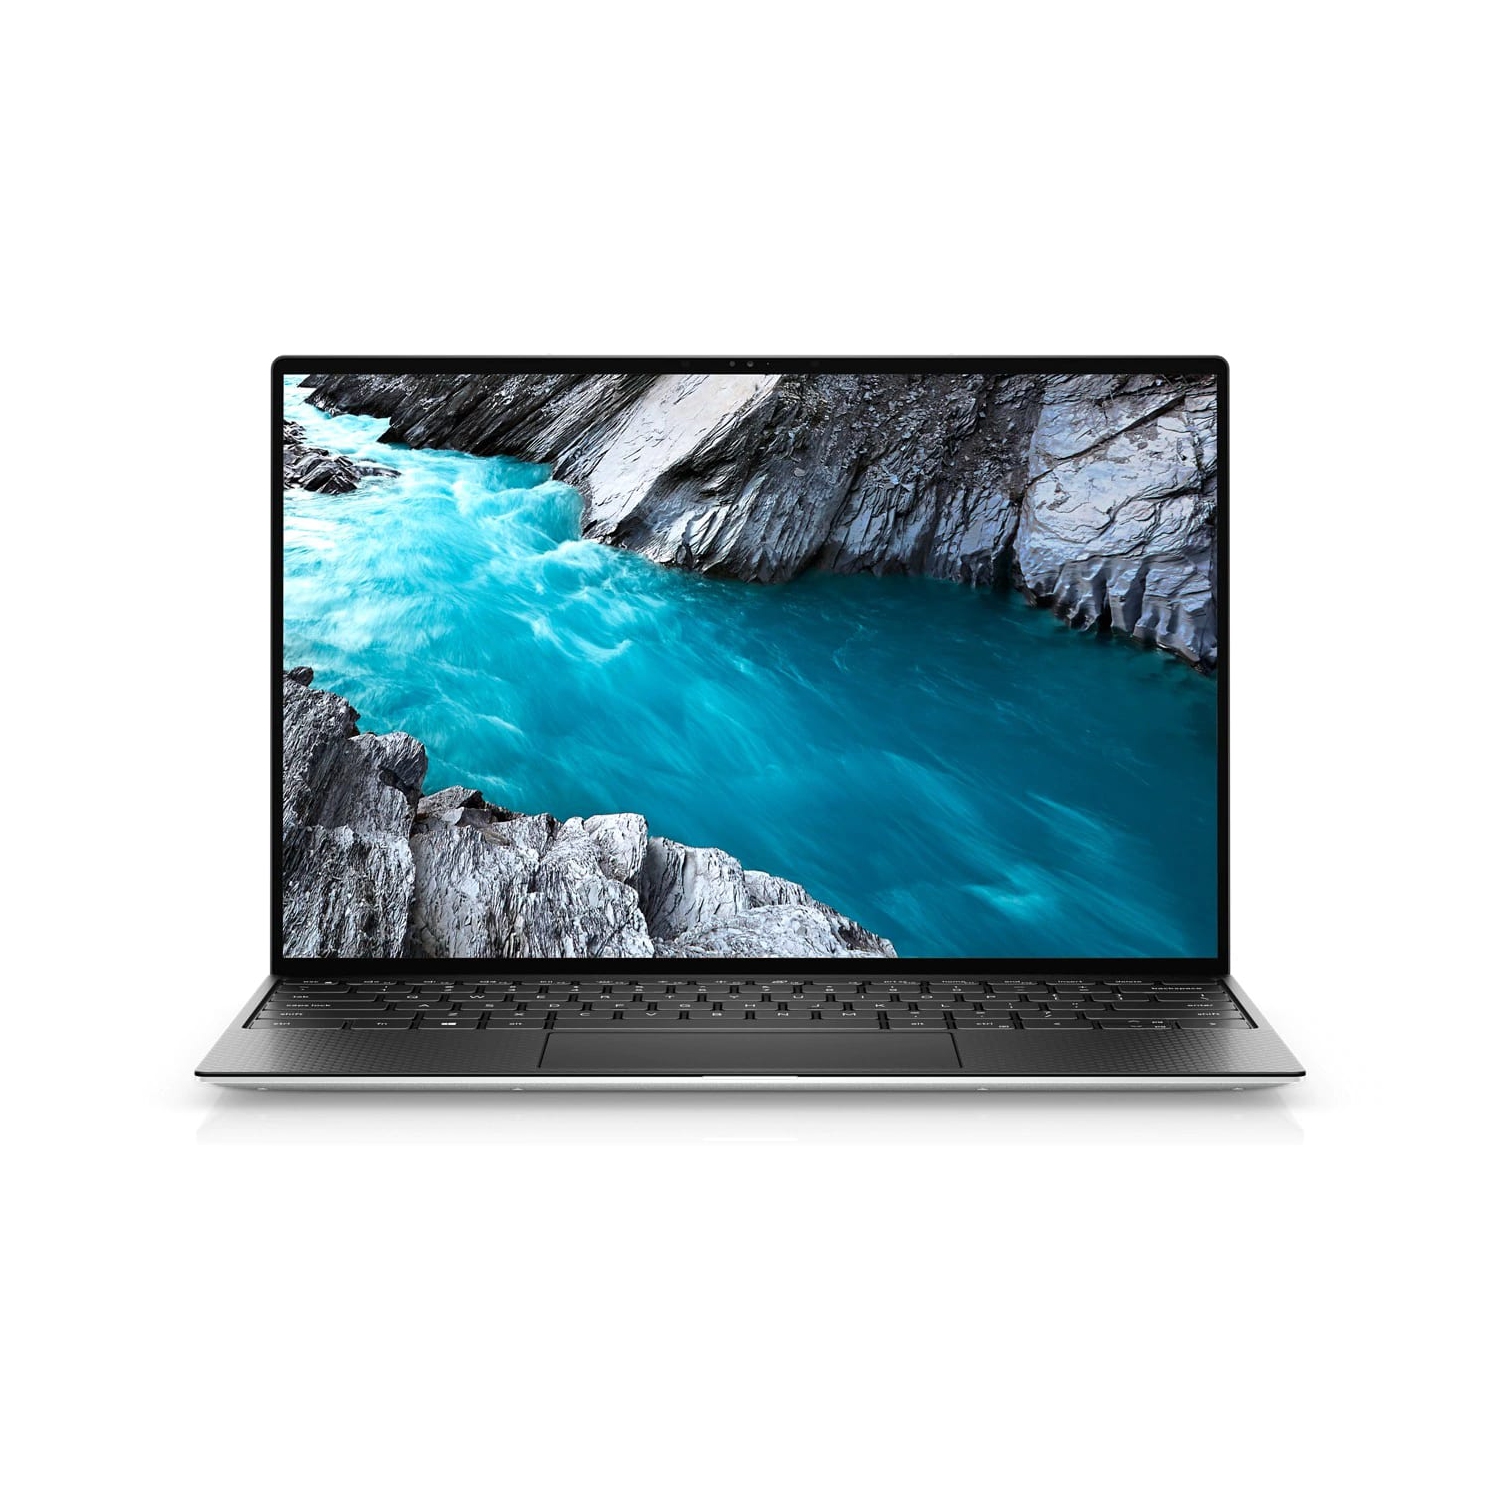 Refurbished (Excellent) - Dell XPS 13 9310 Laptop (2020) | 13.4" FHD+ | Core i5 - 512GB SSD - 16GB RAM | 4 Cores @ 4.2 GHz - 11th Gen CPU Certified Refurbished